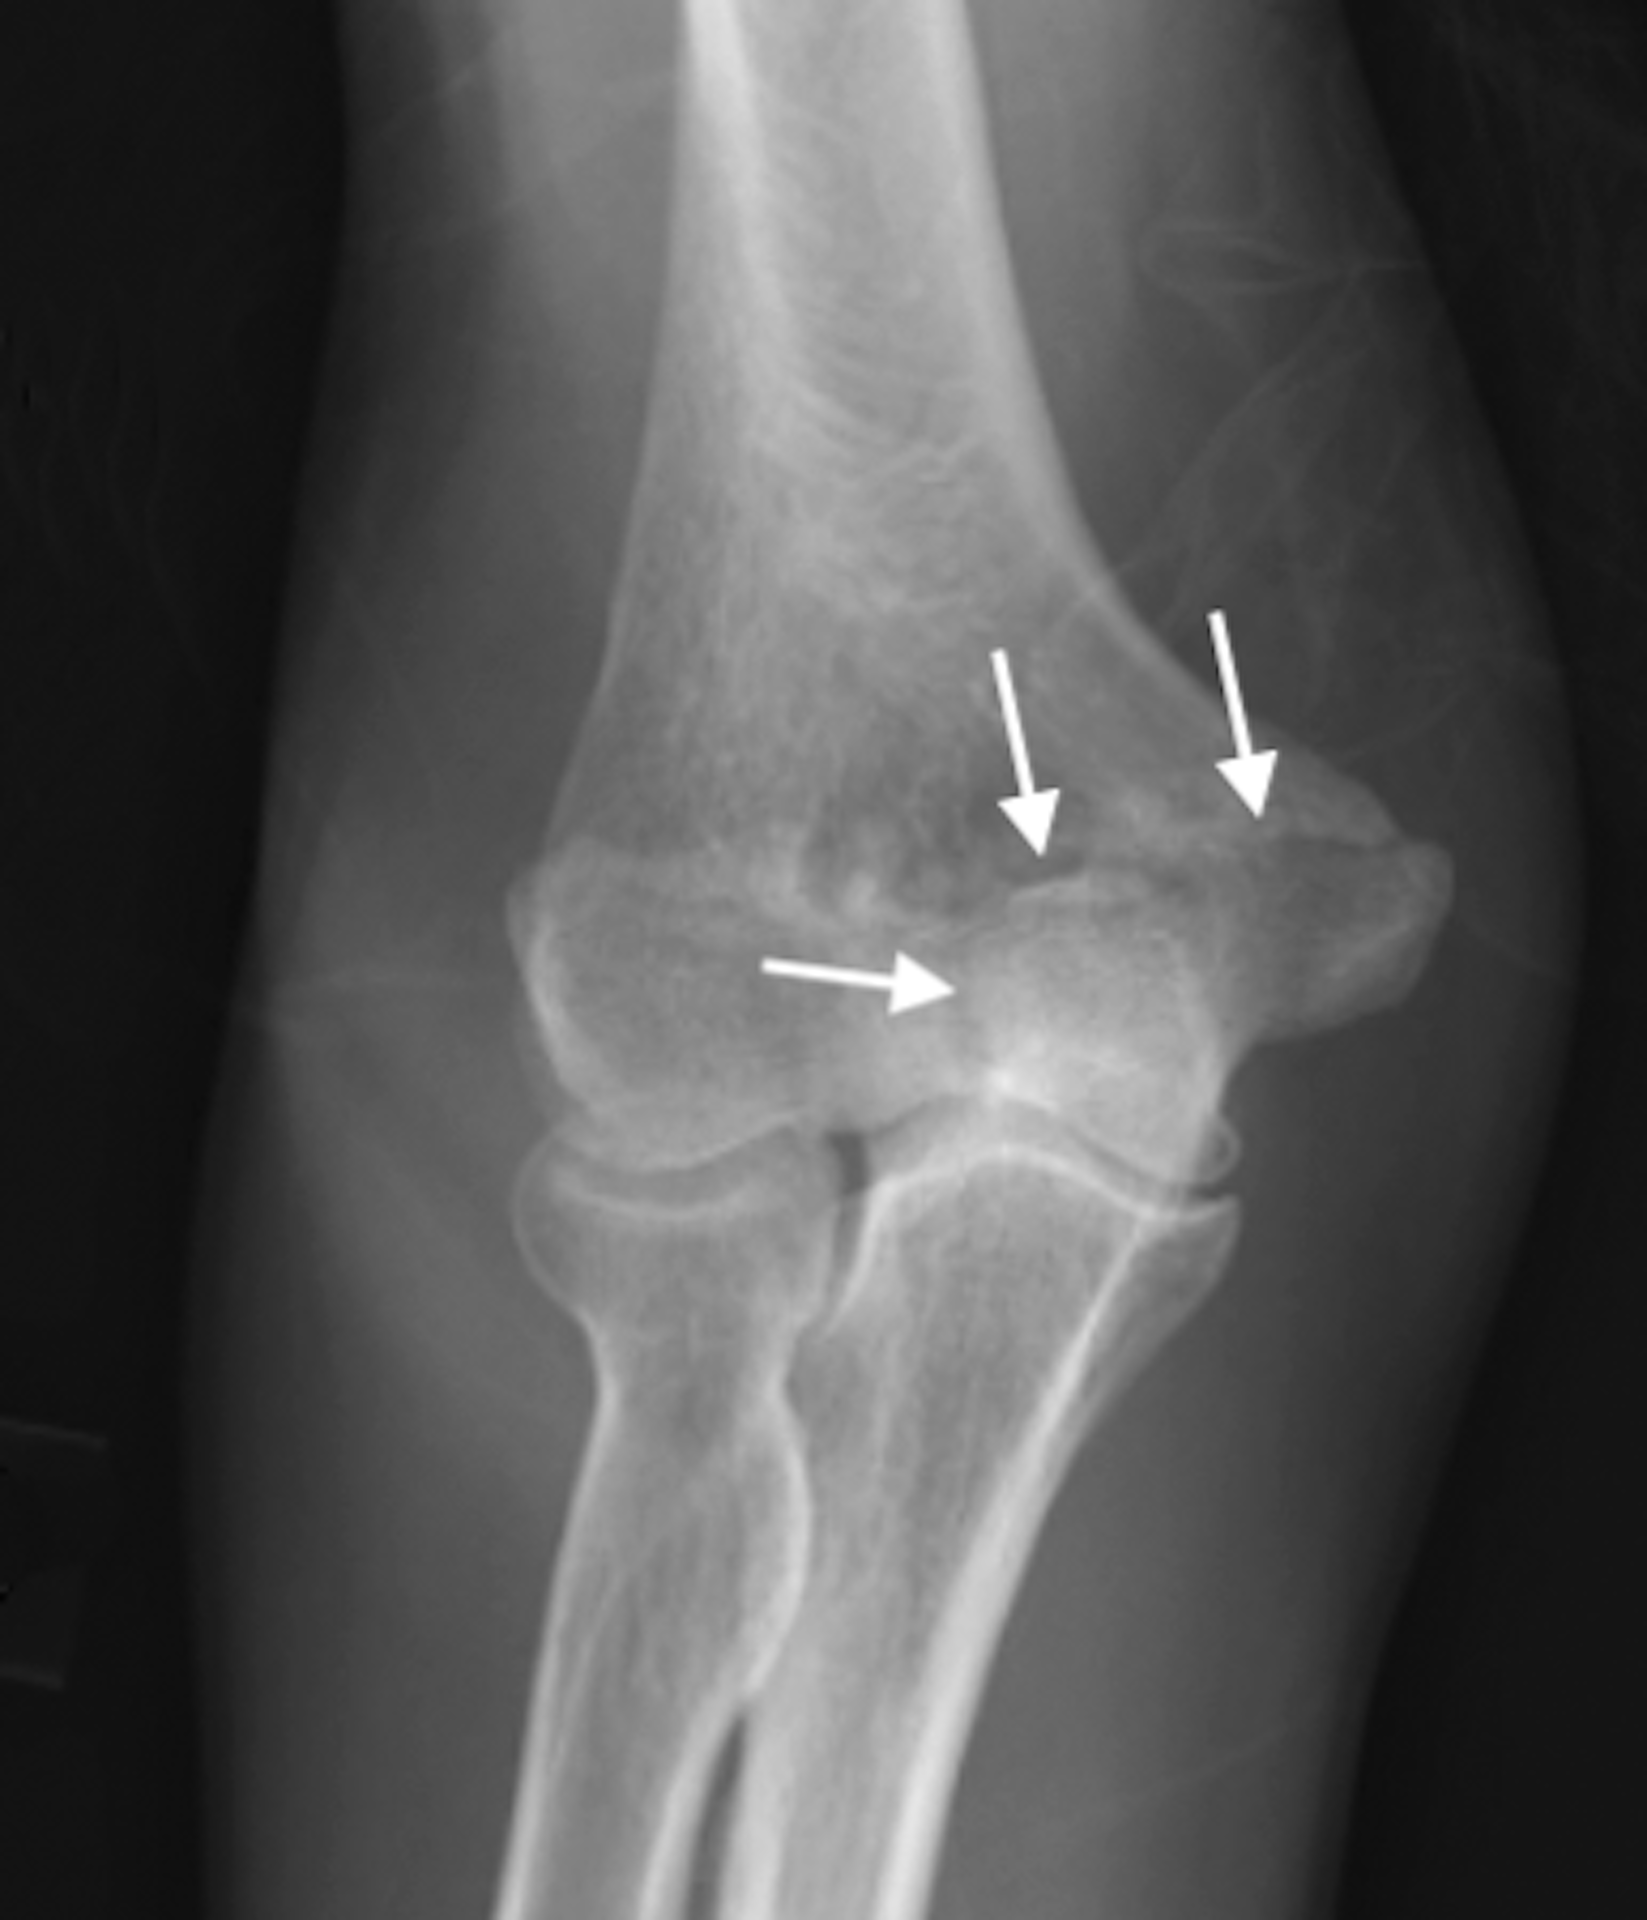 Trochlear Fracture (arrows), AP X-ray, as part of a distal humerus fracture